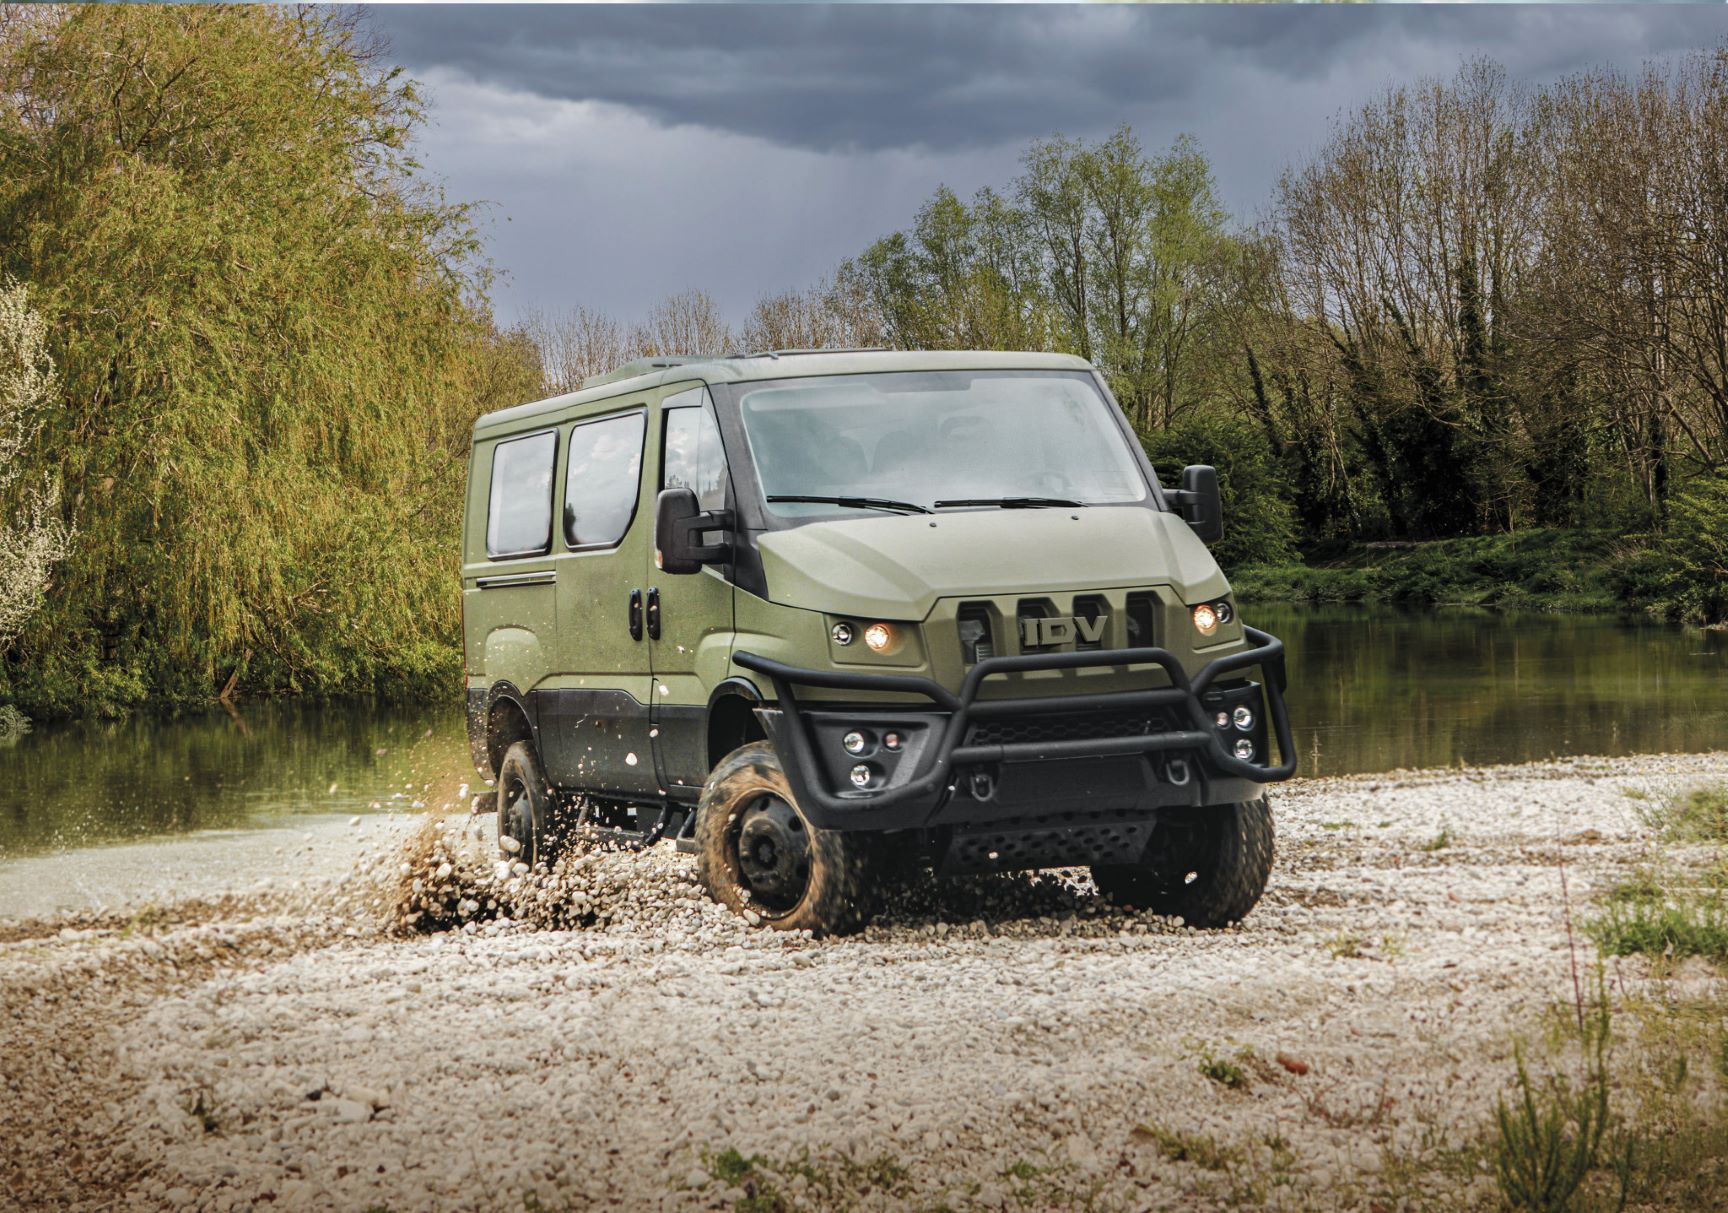 An Iveco Military Utility Vehicle is seen traversing a flooded and muddy terrain. The camouflage-green van's wheels are covered in mud, and the brown water on the ground is seen rippling and splashing because of the vehicle. The area appears to be a swamp or a forest, with overgrown bushes and trees in the background. The sky is dark and cloudy.